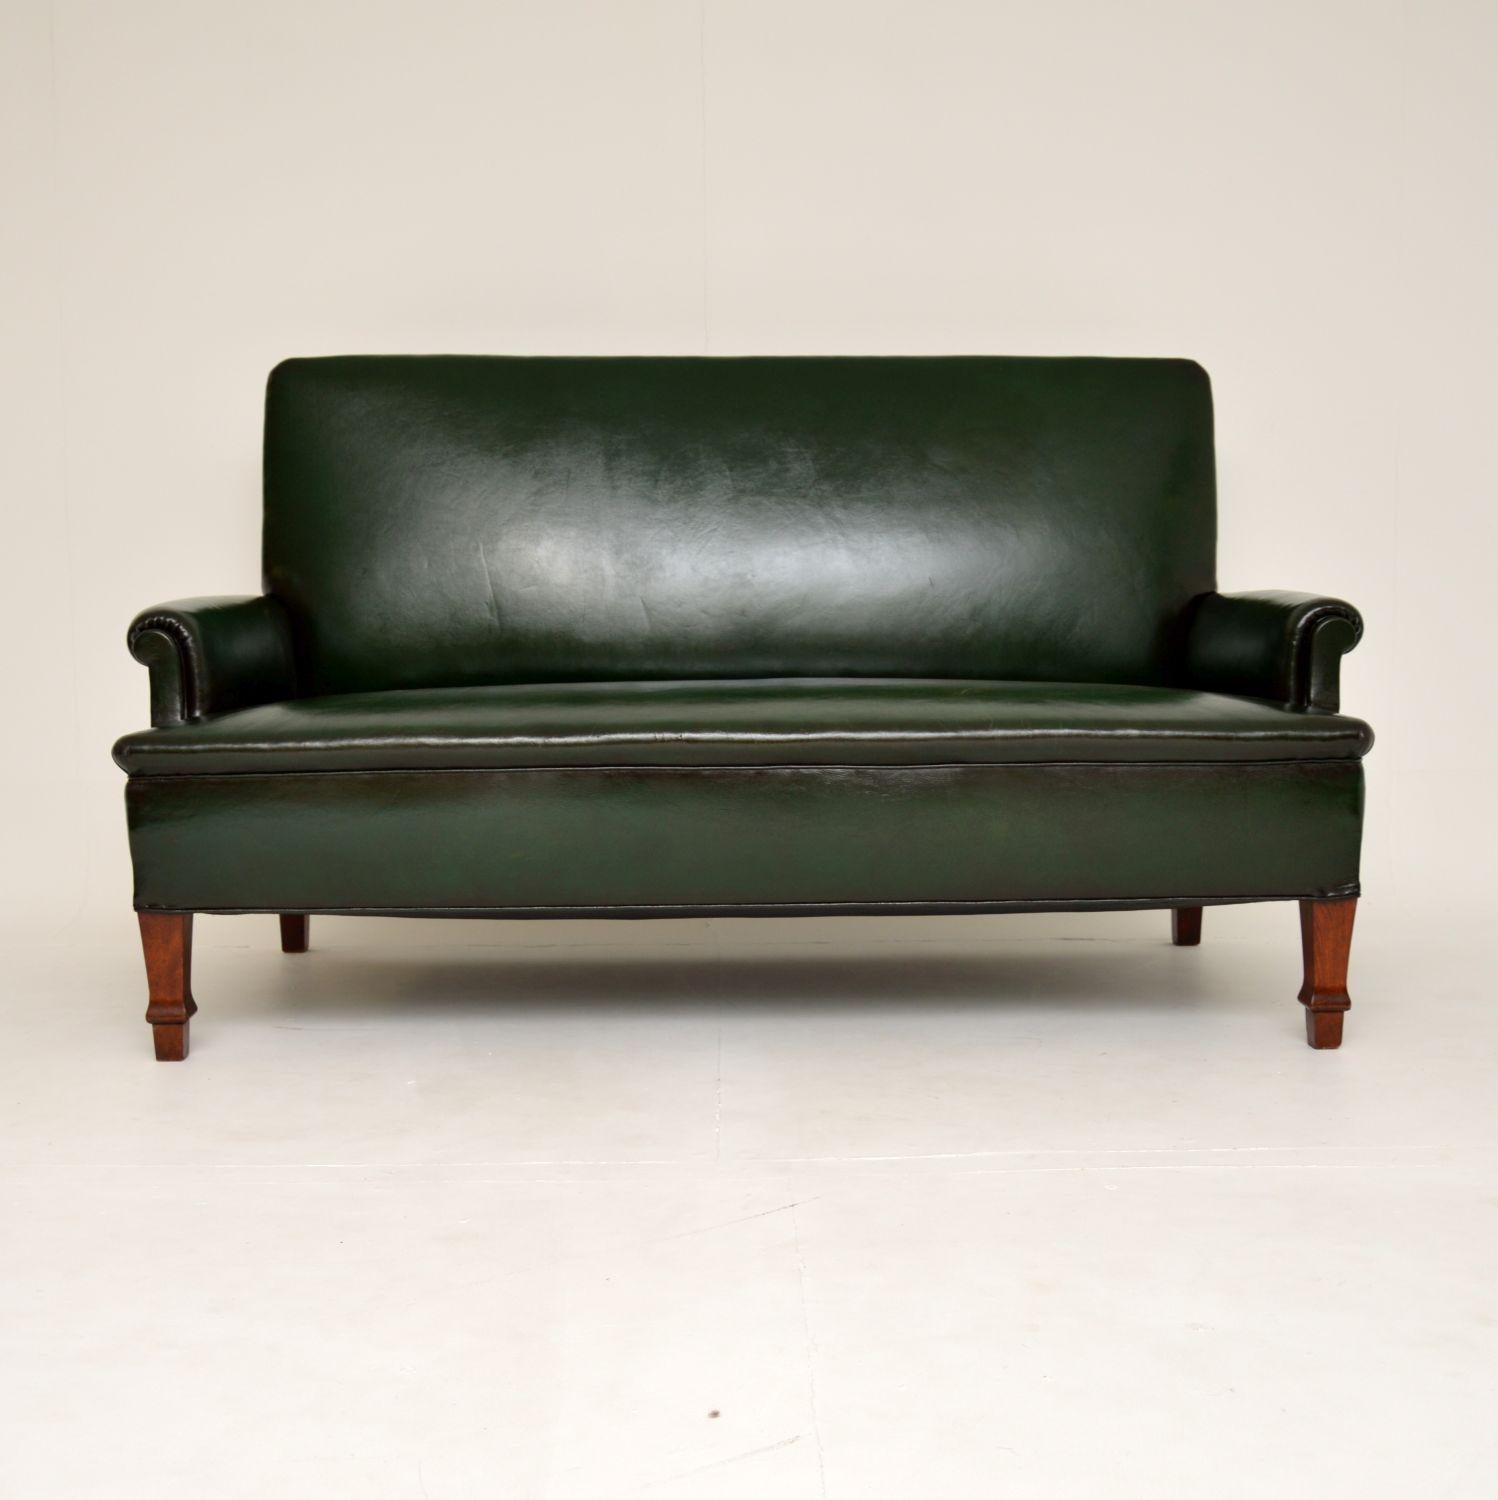 A beautiful and very impressive antique Swedish leather sofa. This was recently imported from Sweden, it dates from around the 1900-10 period.

The quality is amazing, this is extremely sturdy and well built. The sprung seating area is very